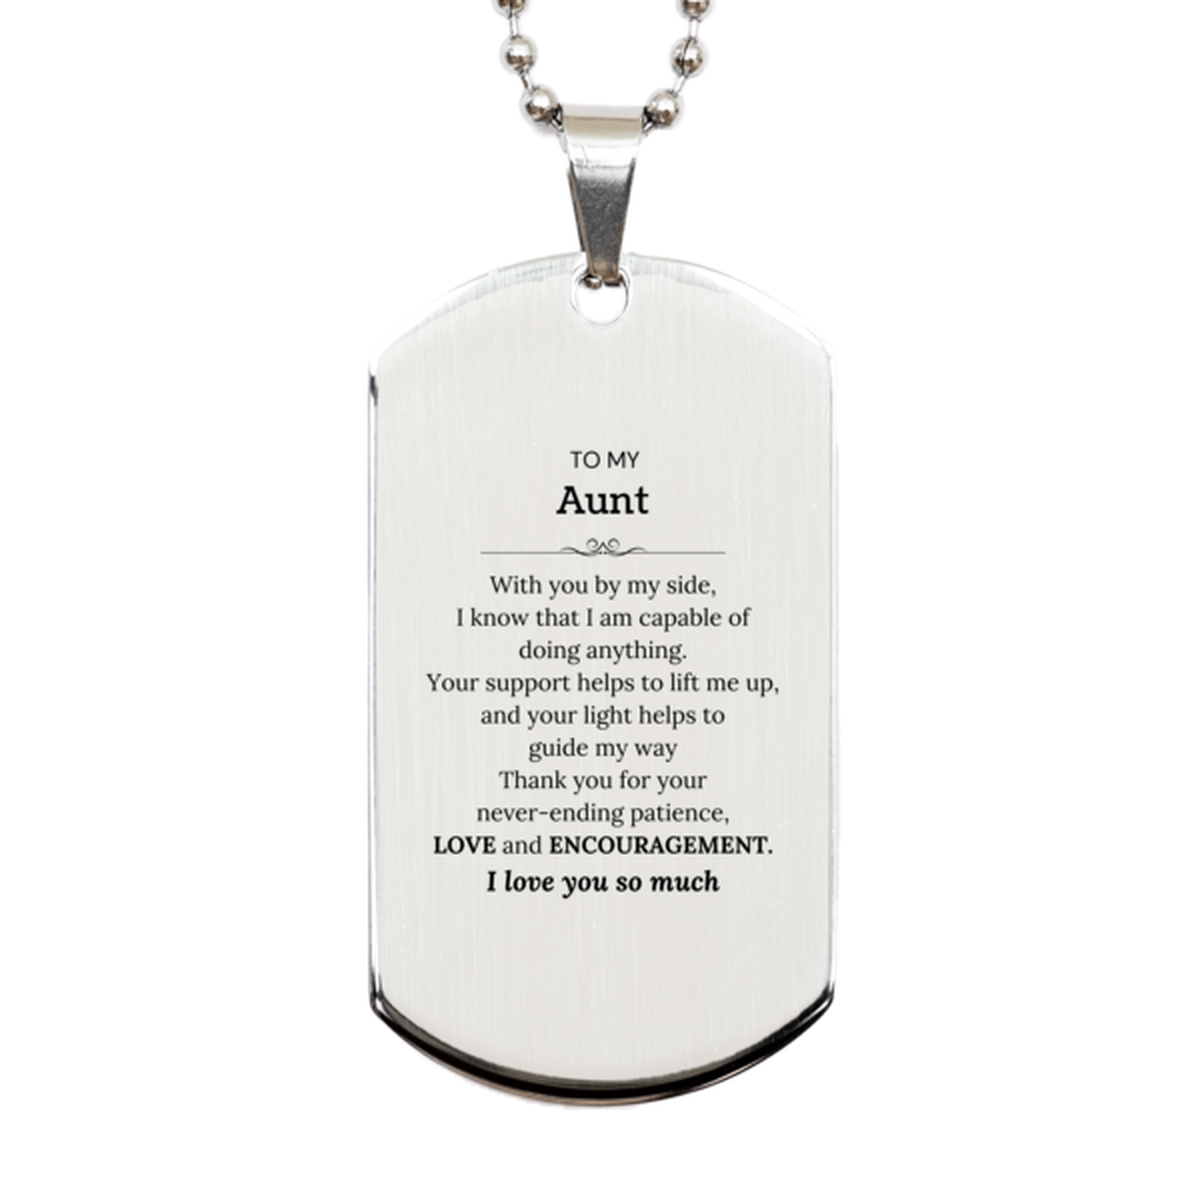 Appreciation Aunt Silver Dog Tag Gifts, To My Aunt Birthday Christmas Wedding Keepsake Gifts for Aunt With you by my side, I know that I am capable of doing anything. I love you so much